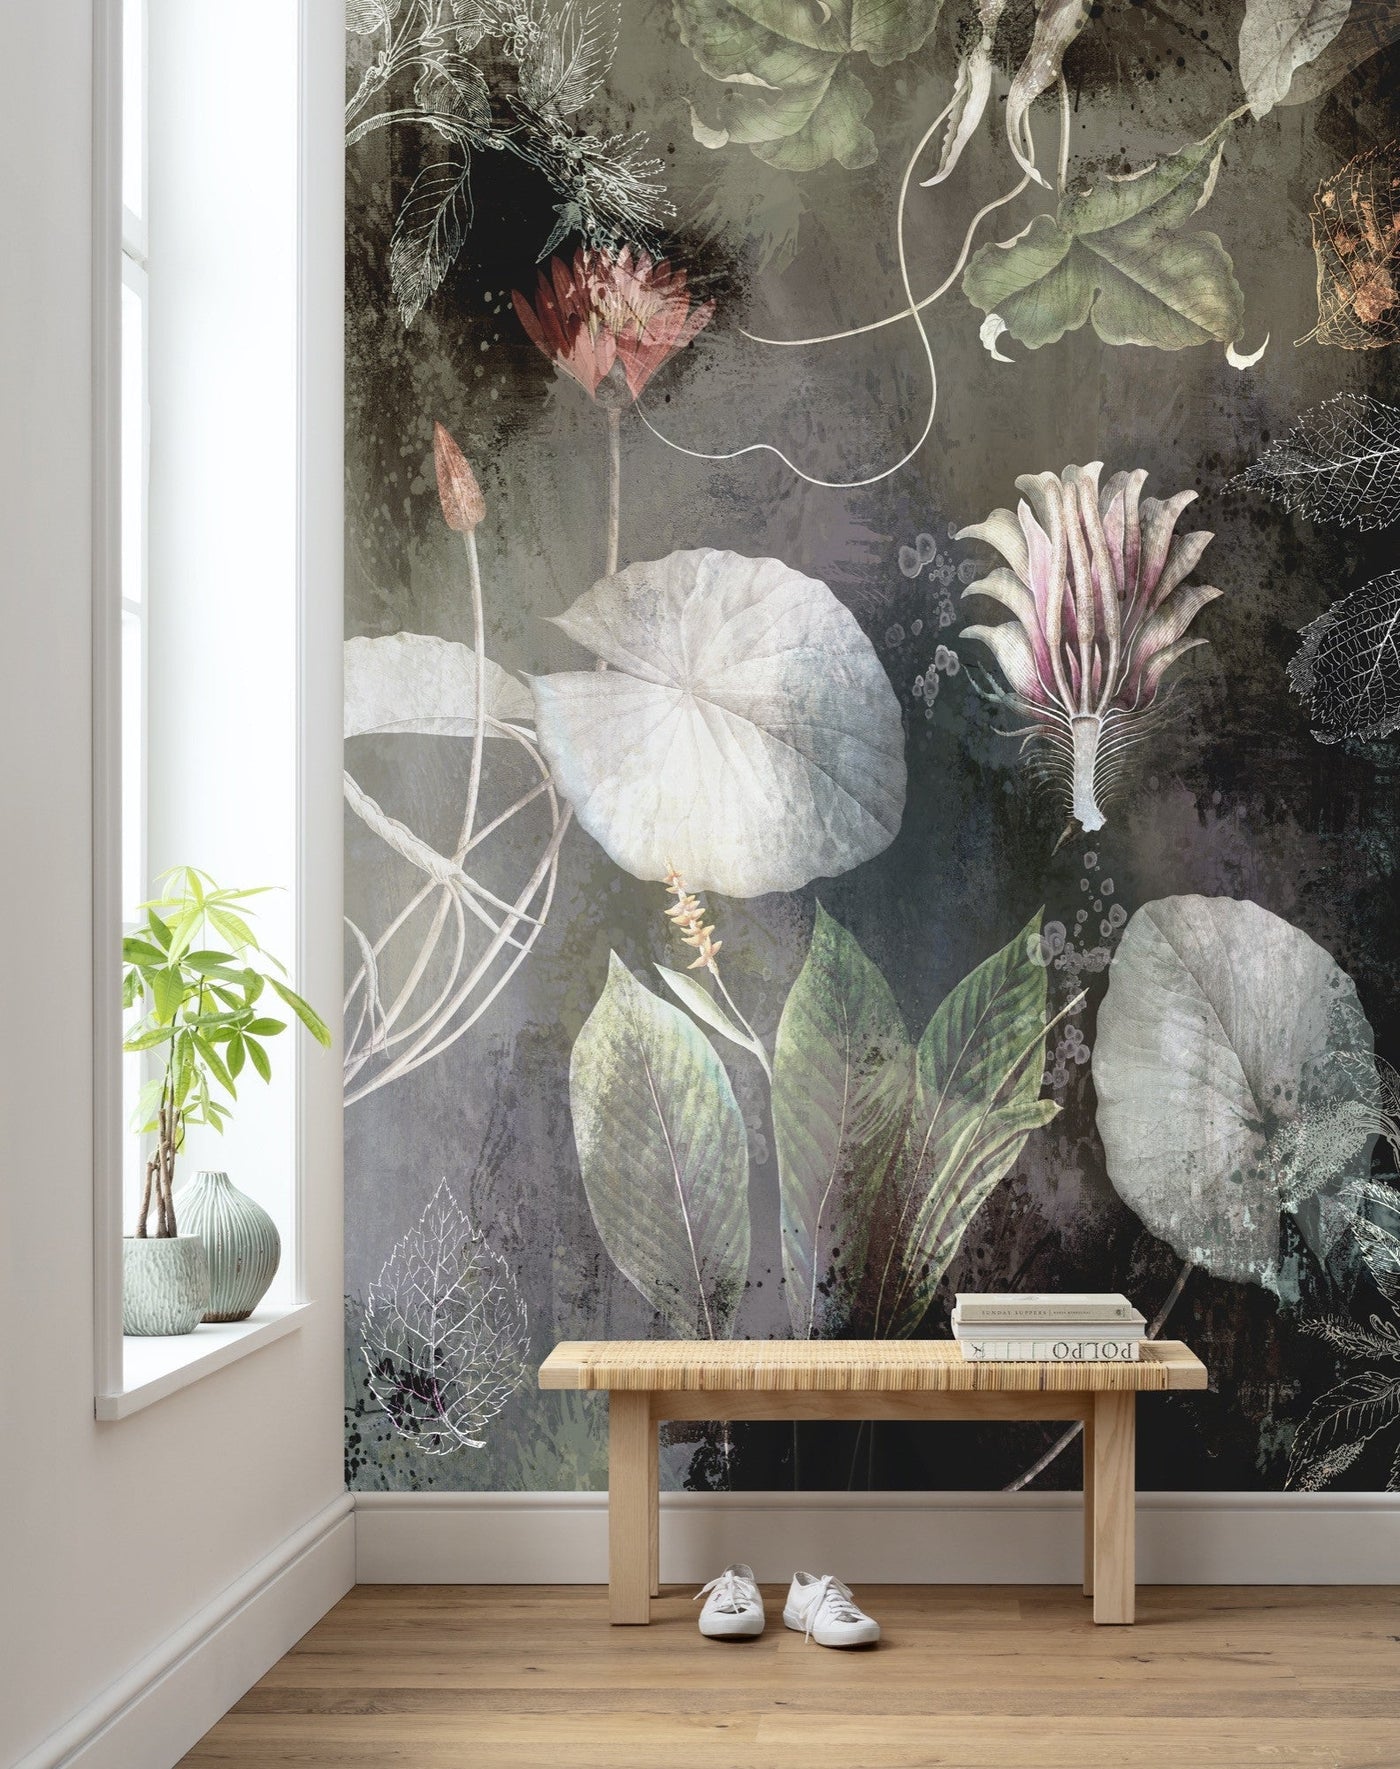 Flowers at Night Mural Wallpaper-Wall Decor-ECO MURALS, FLORAL WALLPAPERS, MURALS, MURALS / WALLPAPERS, NON-WOVEN WALLPAPER-Forest Homes-Nature inspired decor-Nature decor